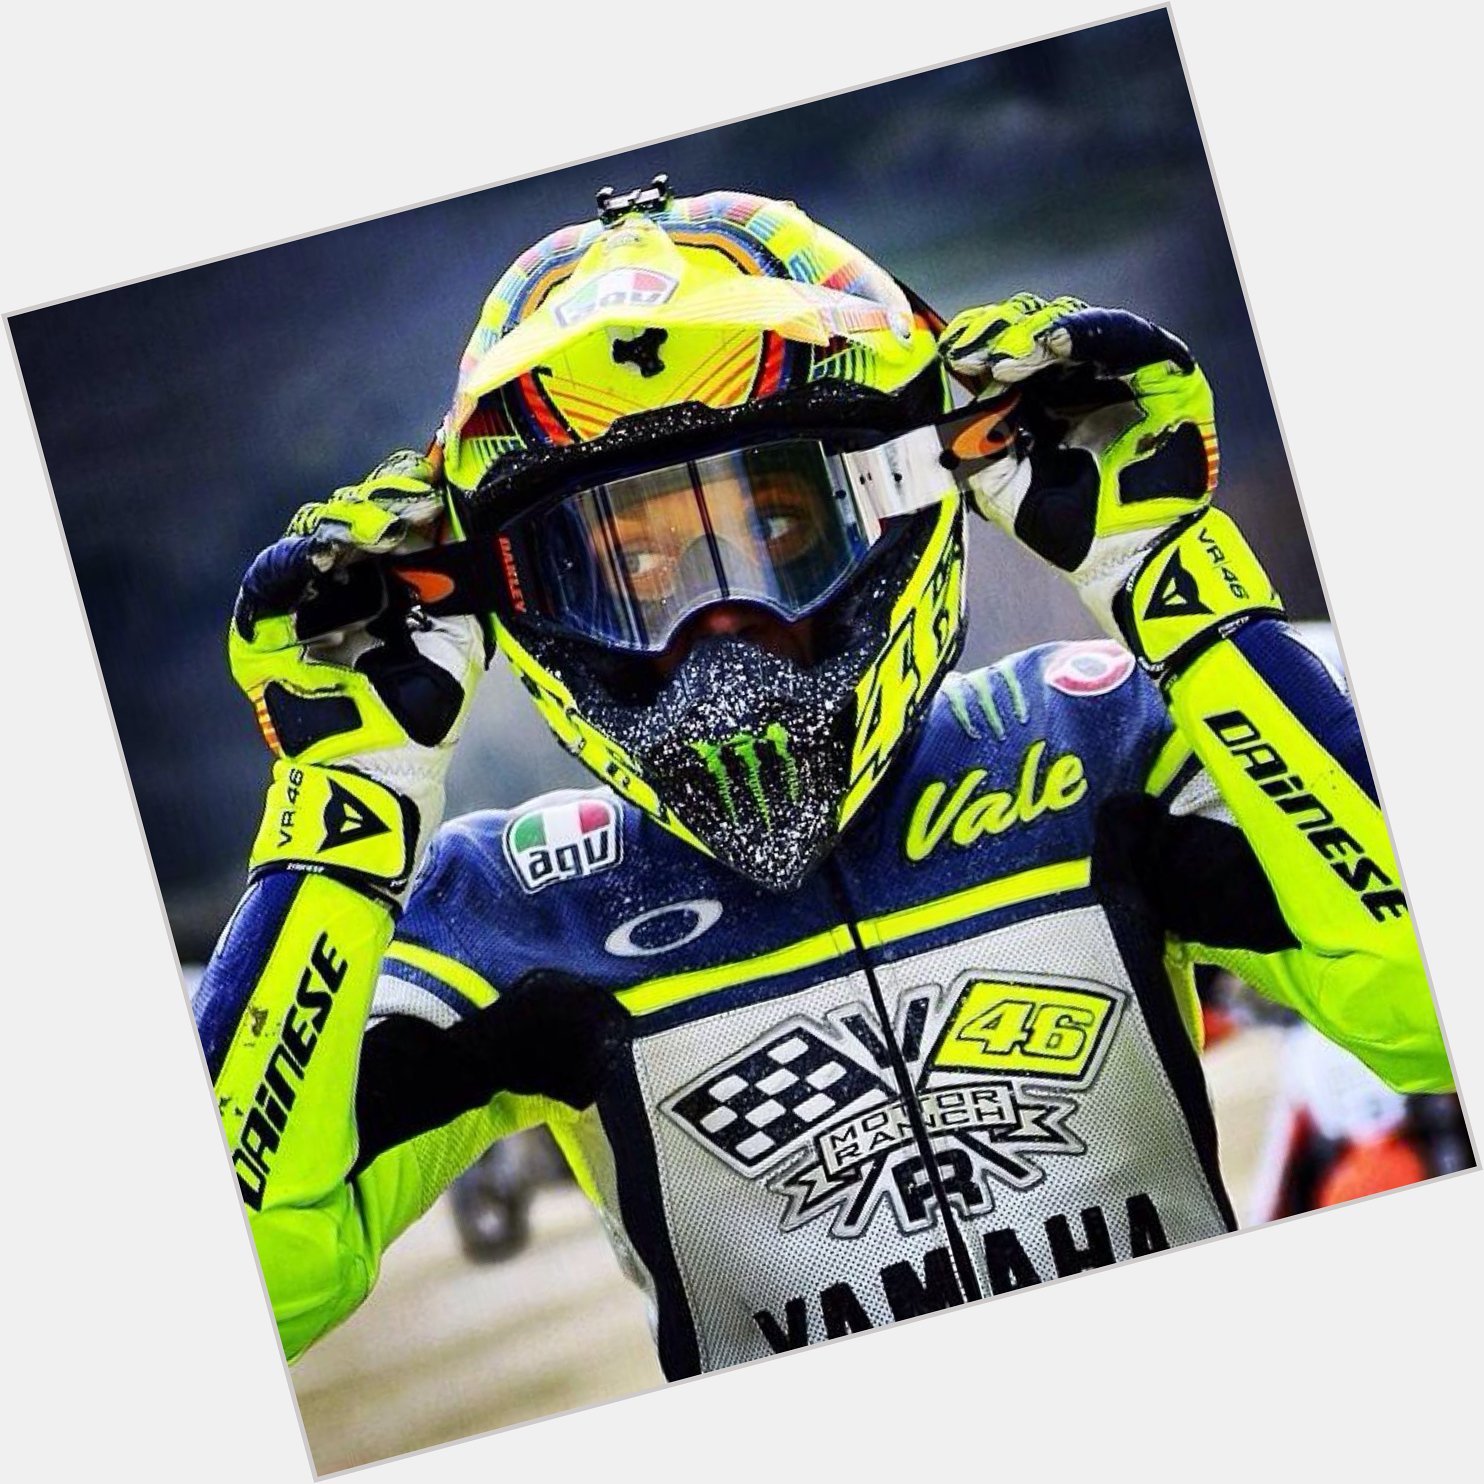 Happy Birthday to the GOAT of the biker world, the legend himself Valentino Rossi  